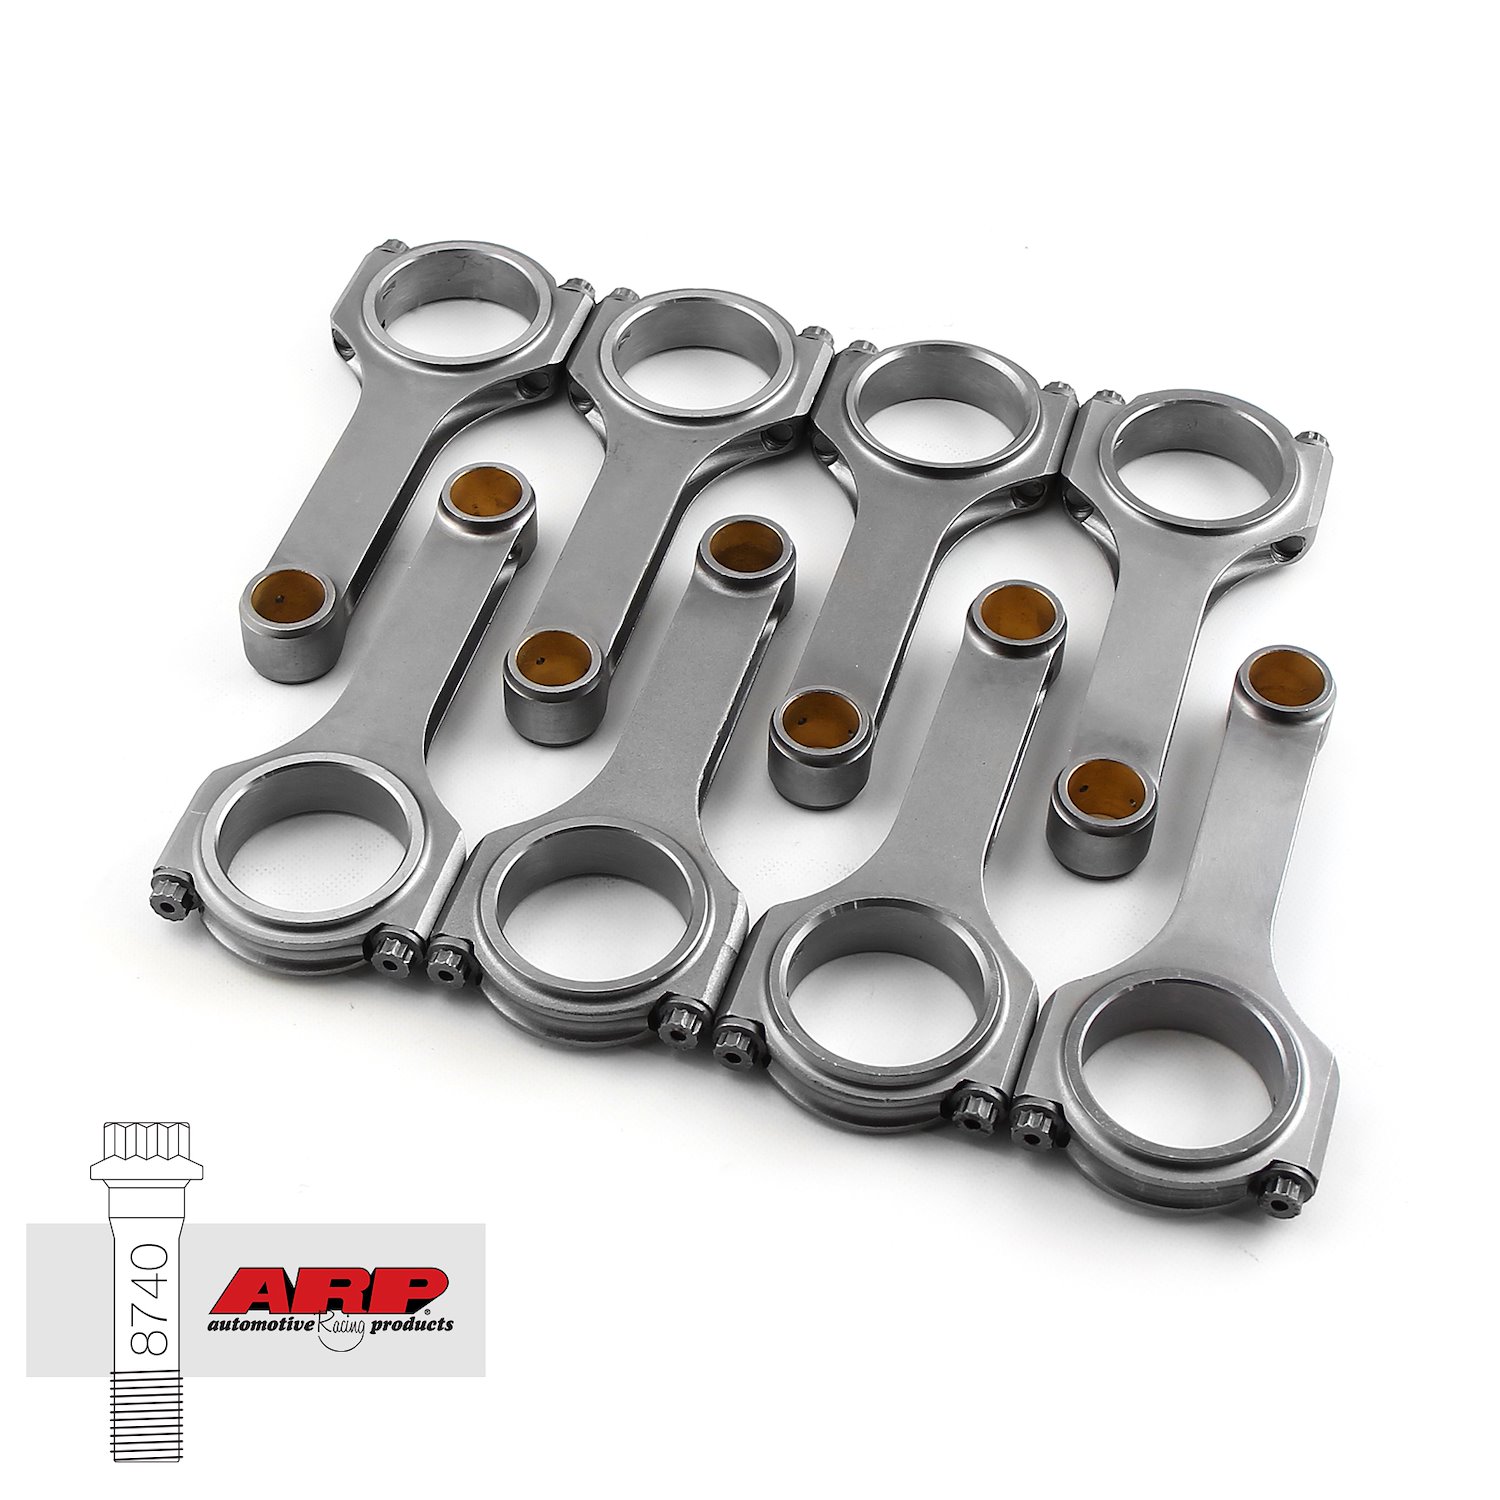 H BEAM 6.125 2.100 .927 4340 CONNECTING RODS